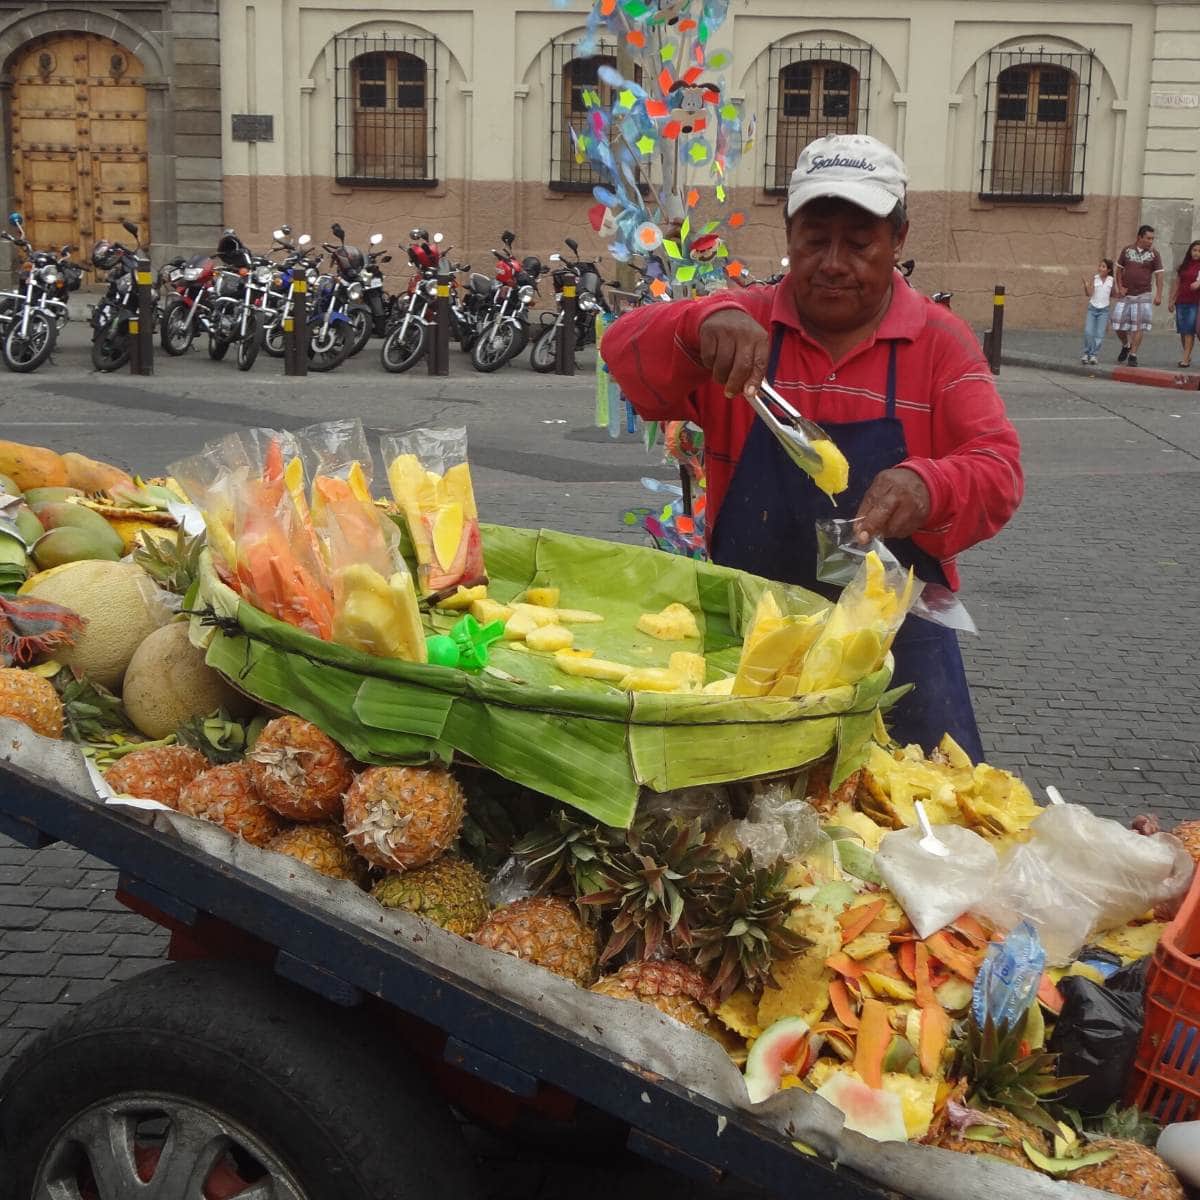 A fruit stand in Guatemala.